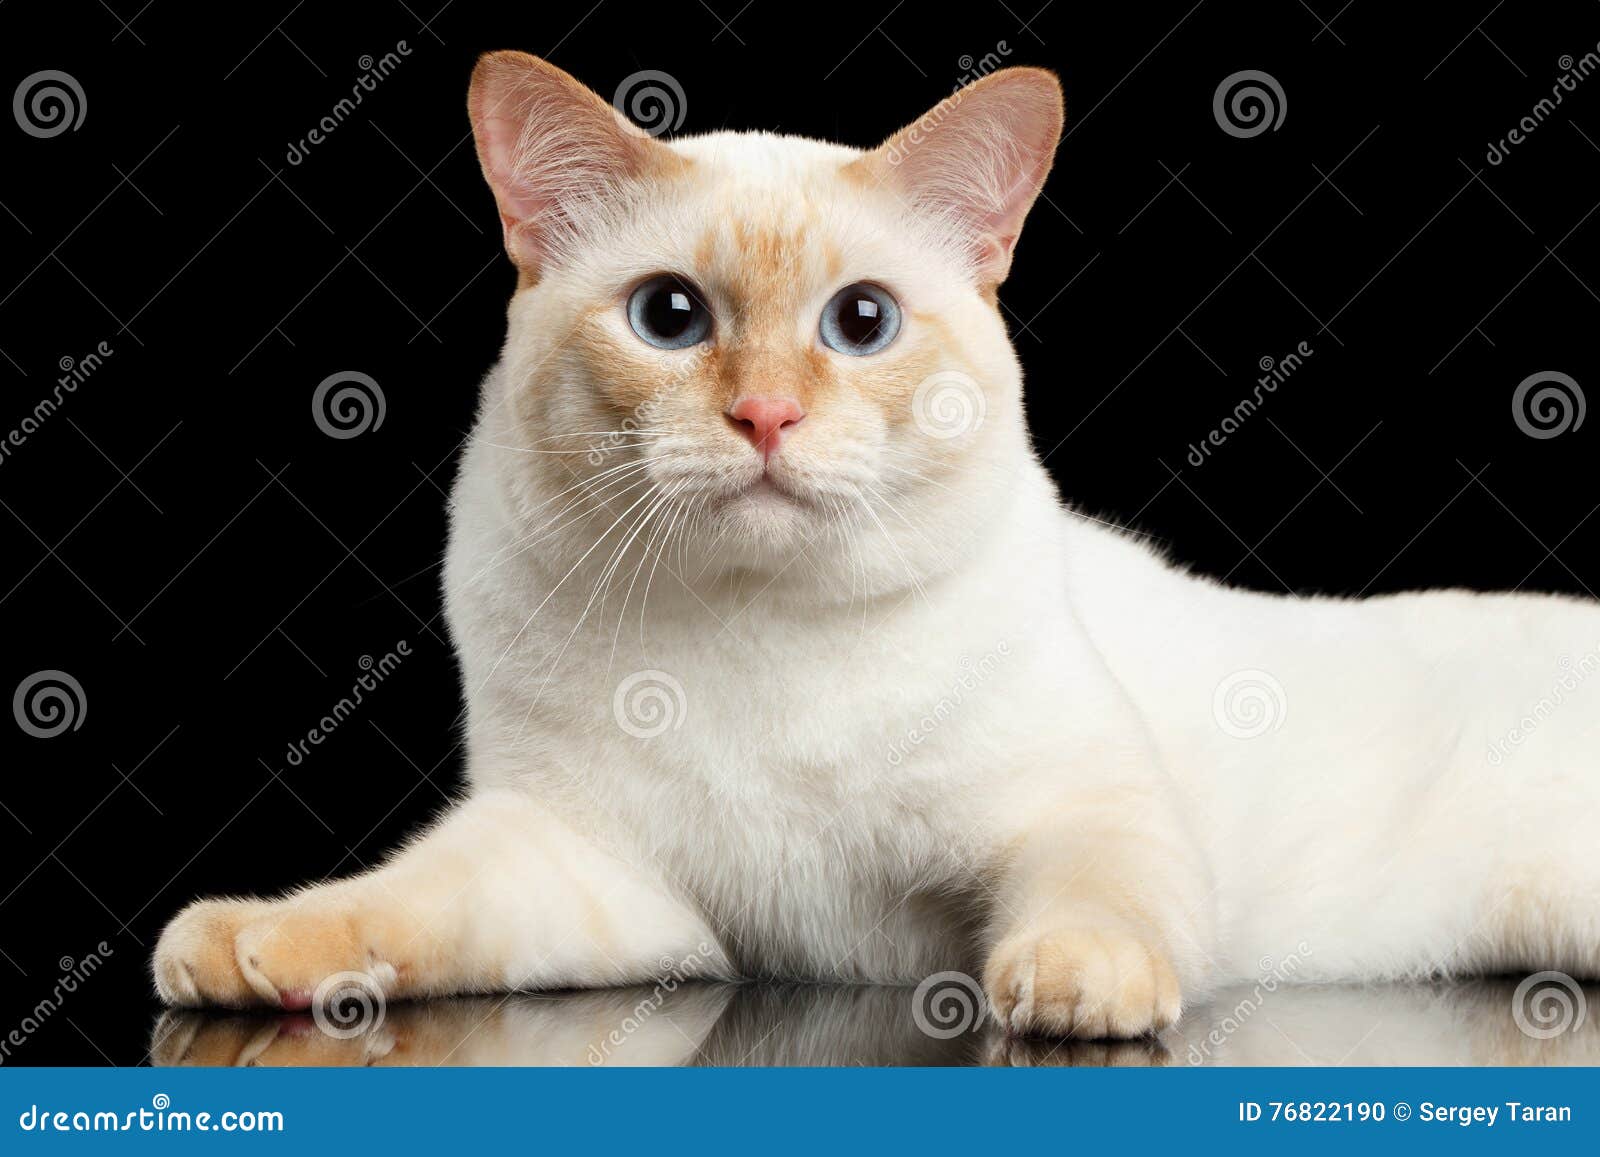 Fantastic Breed Mekong Bobtail Cat Isolated Black Background Stock Photo Image Of Closeup Attention 76822190